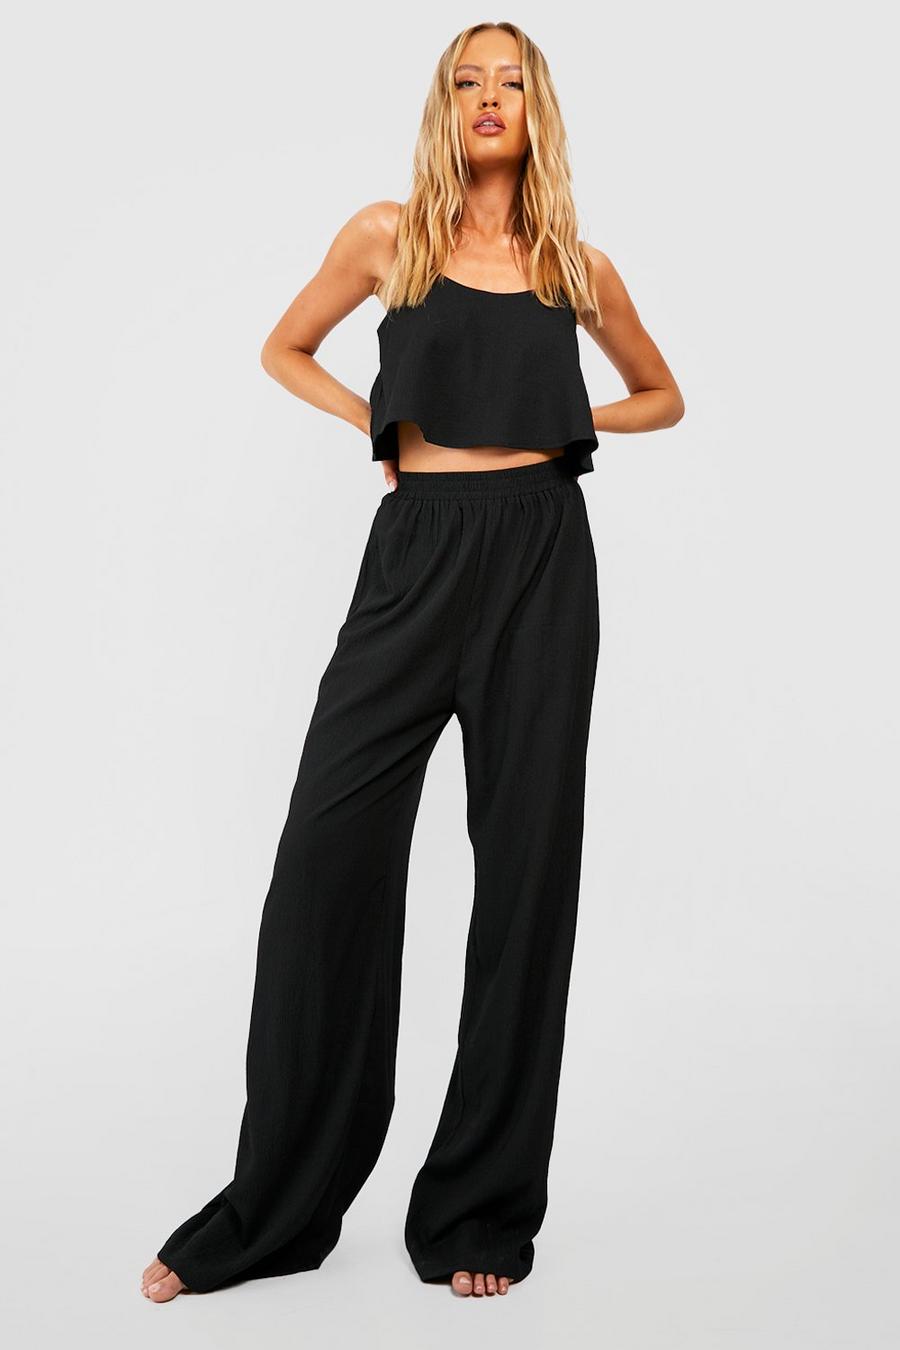 Black Tall Textured Swing Crop And Wide Leg Pants Set image number 1